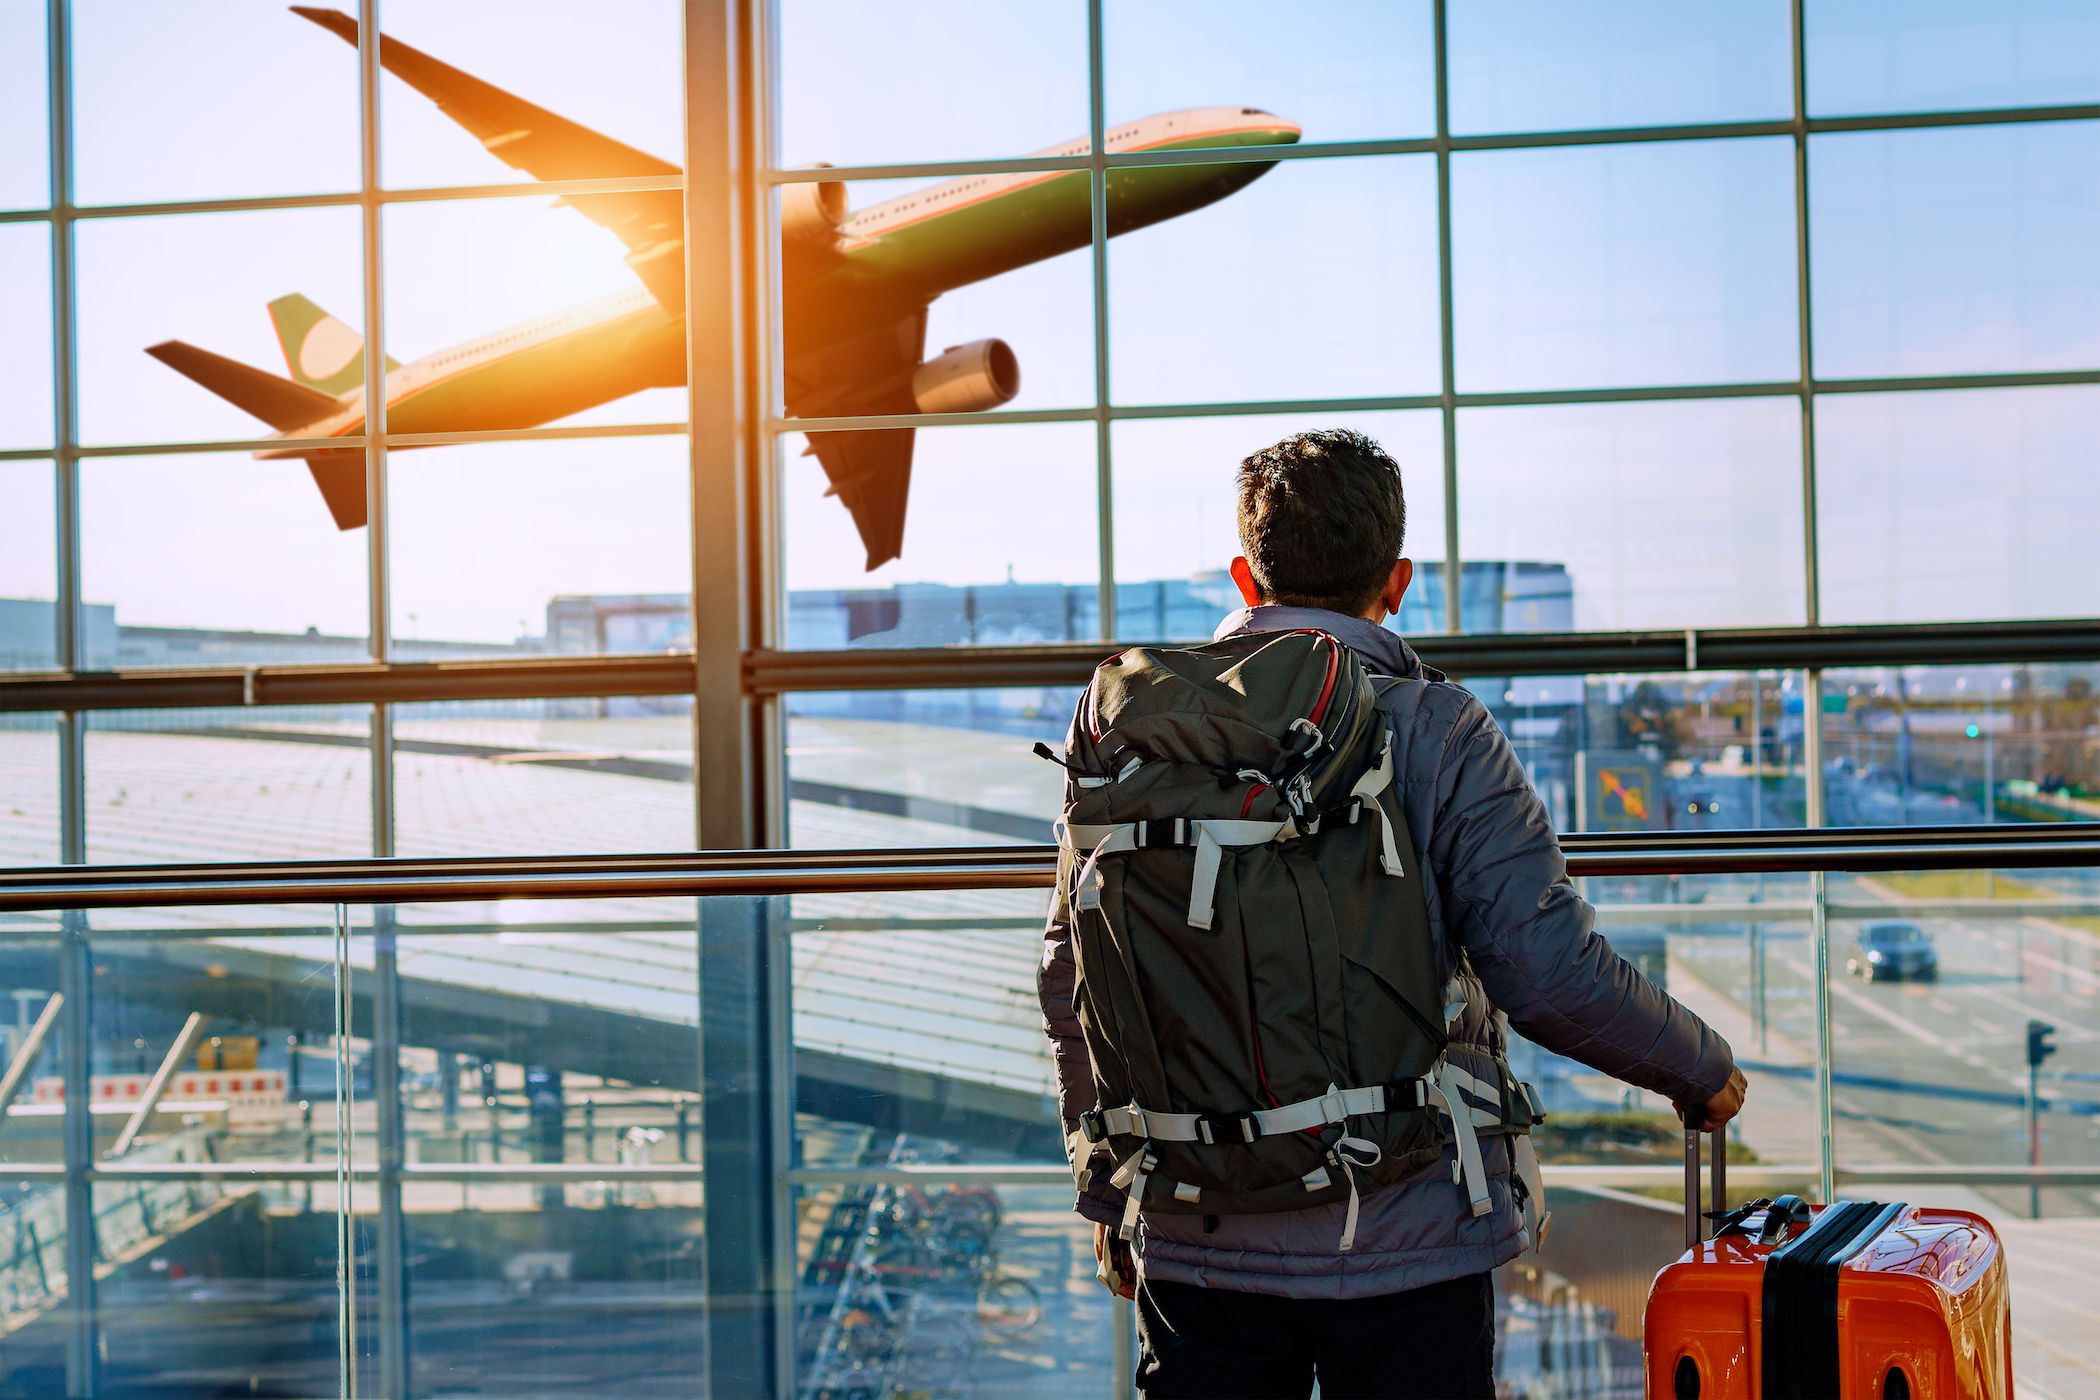 8 best frequent flyer programs for air miles, cheaper tickets and hotels